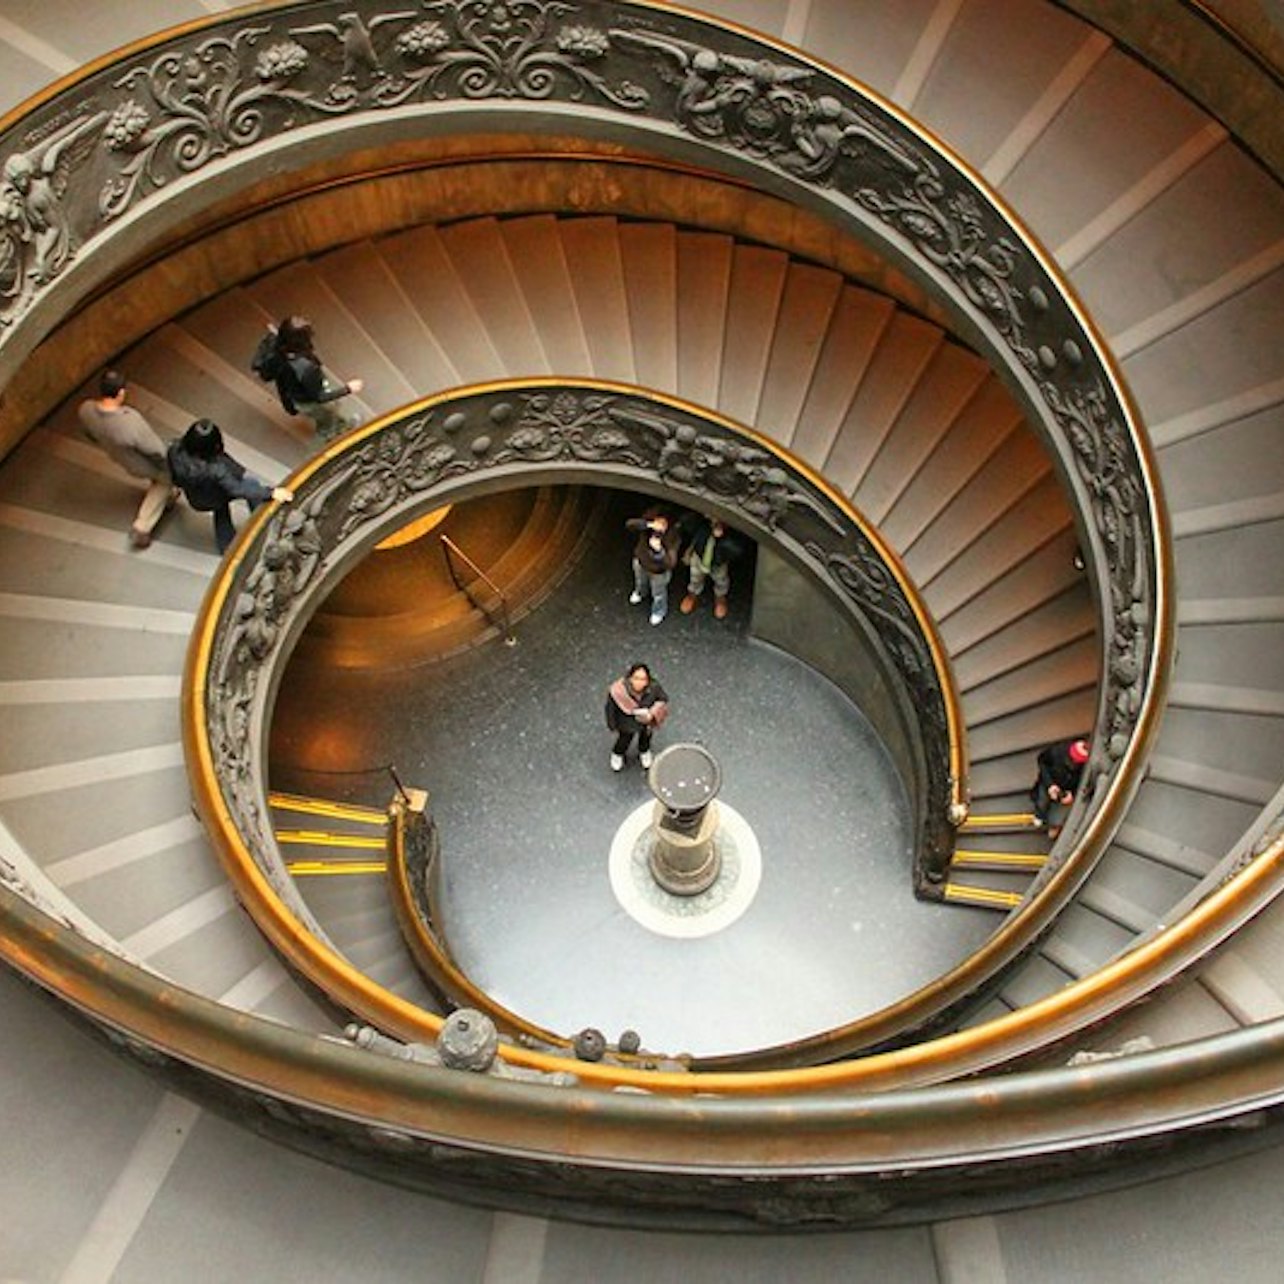 Vatican Museums: Audio Guide App for Your Smartphone - Accommodations in Rome